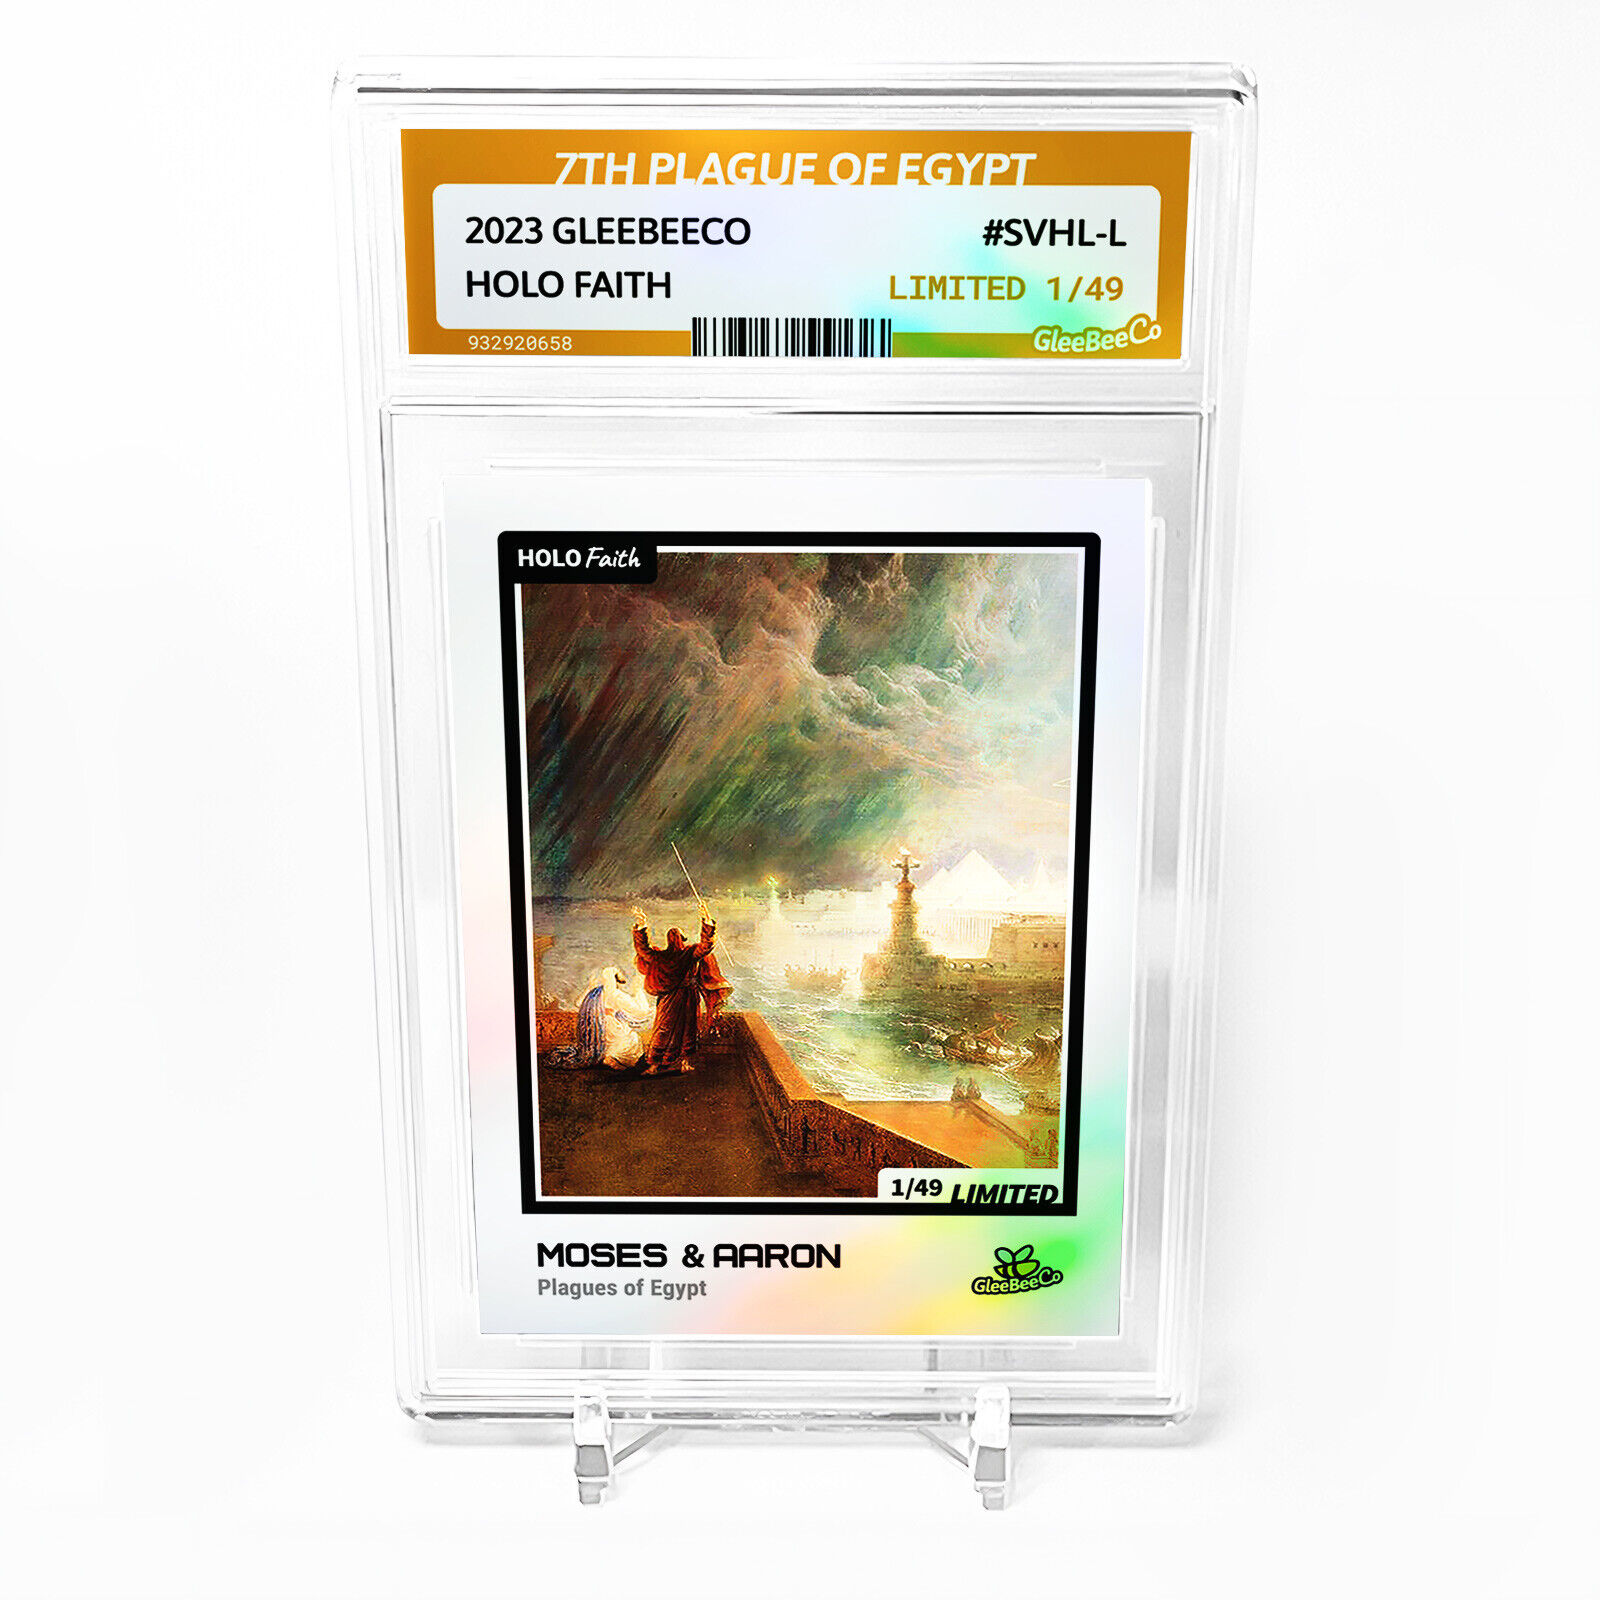 SEVENTH PLAGUE OF EGYPT Hail and Fire Moses 2023 GleeBeeCo Card Holo #SVHL-L /49